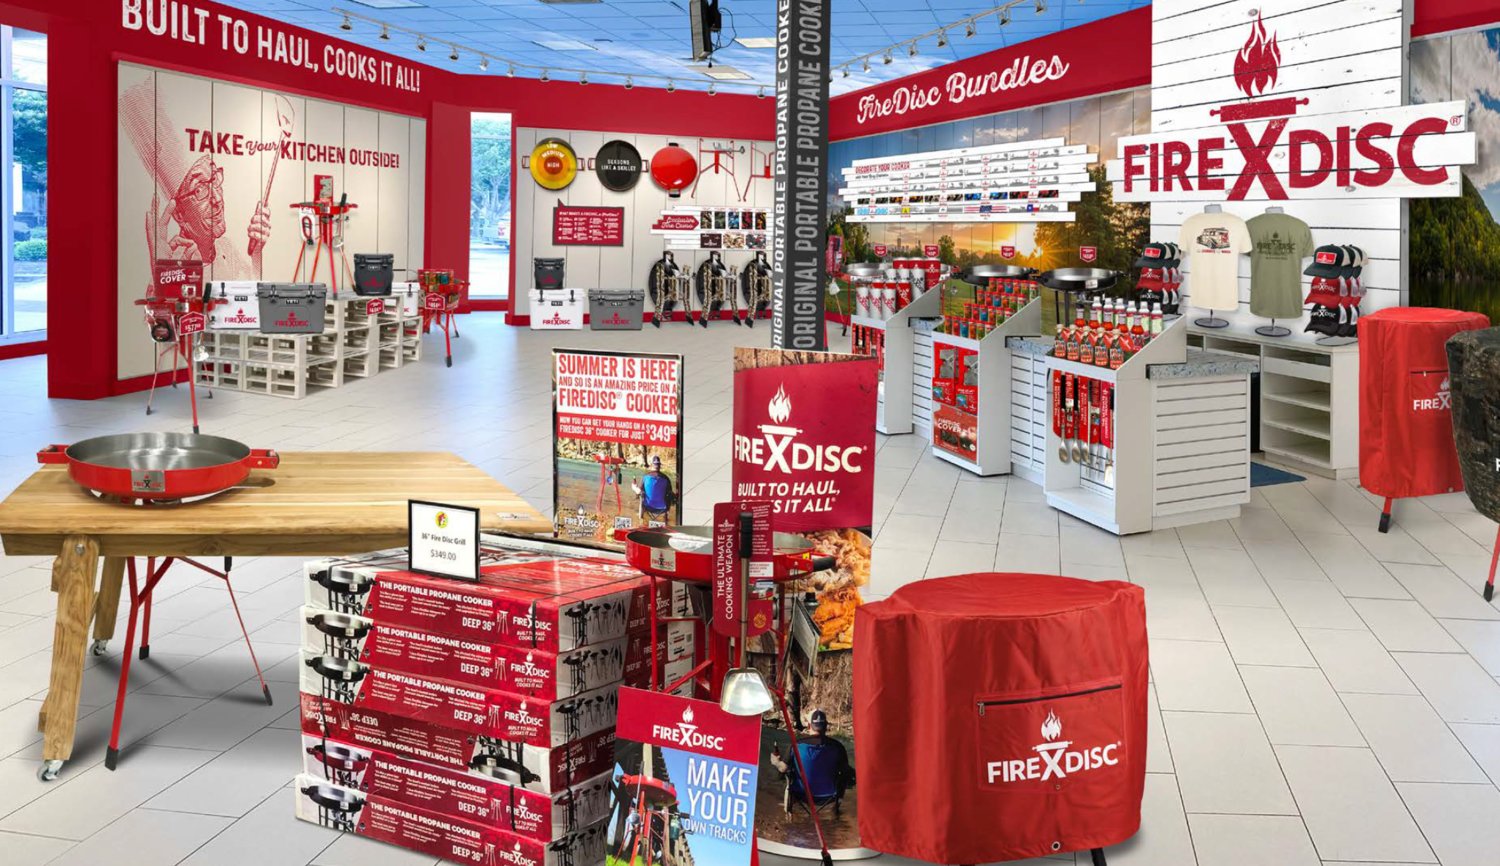 Outdoor cooking manufacturer FIREDISC Cookers is set to open its flagship store in the LaCenterra Shopping Center Nov. 1. The store will feature cookers and accessories as well as advice on how to safely enjoy outdoor cooking.